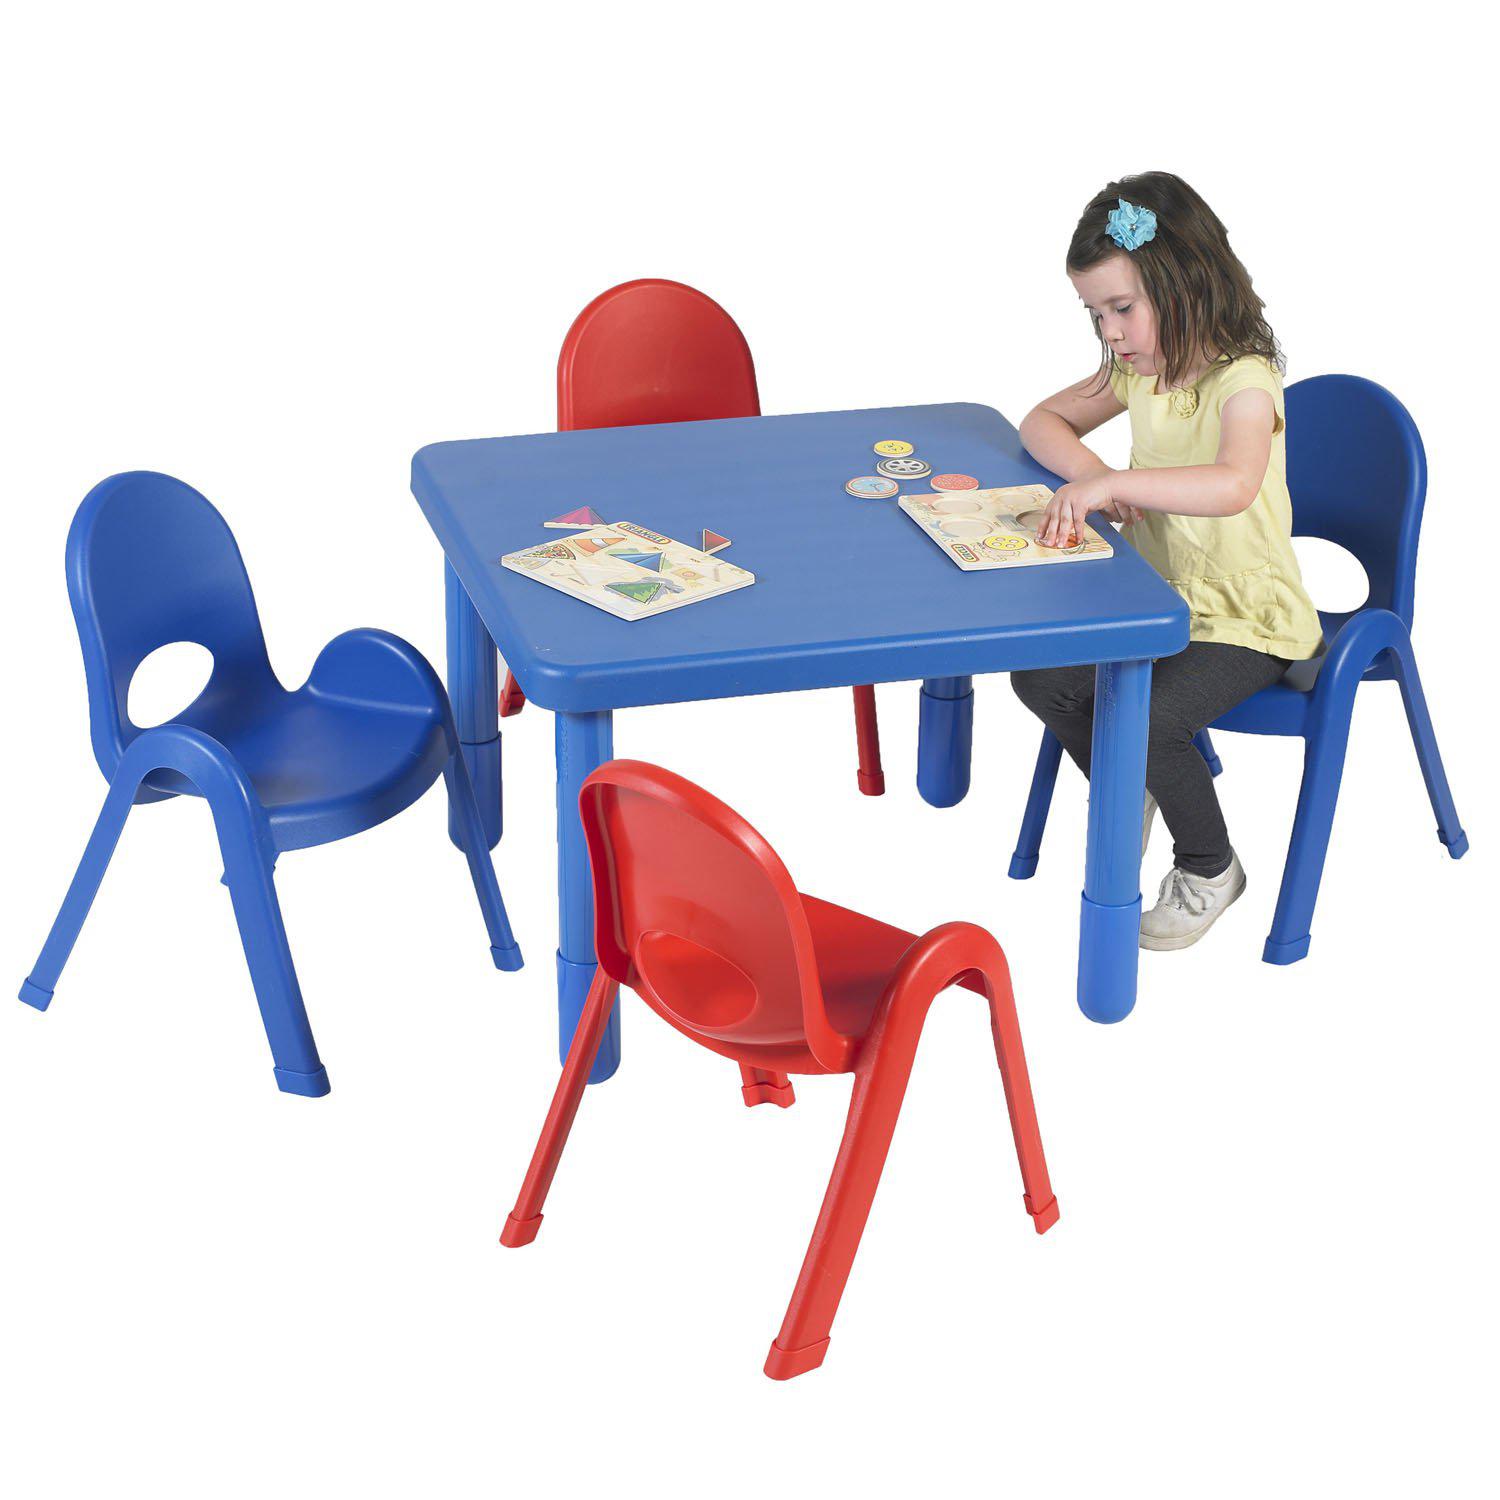 Toddler MyValue™ Table and Chair Set - 28" Square x 20"-High Royal Blue Table with 2 Royal Blue and 2 Candy Apple Red 11"-High Chairs